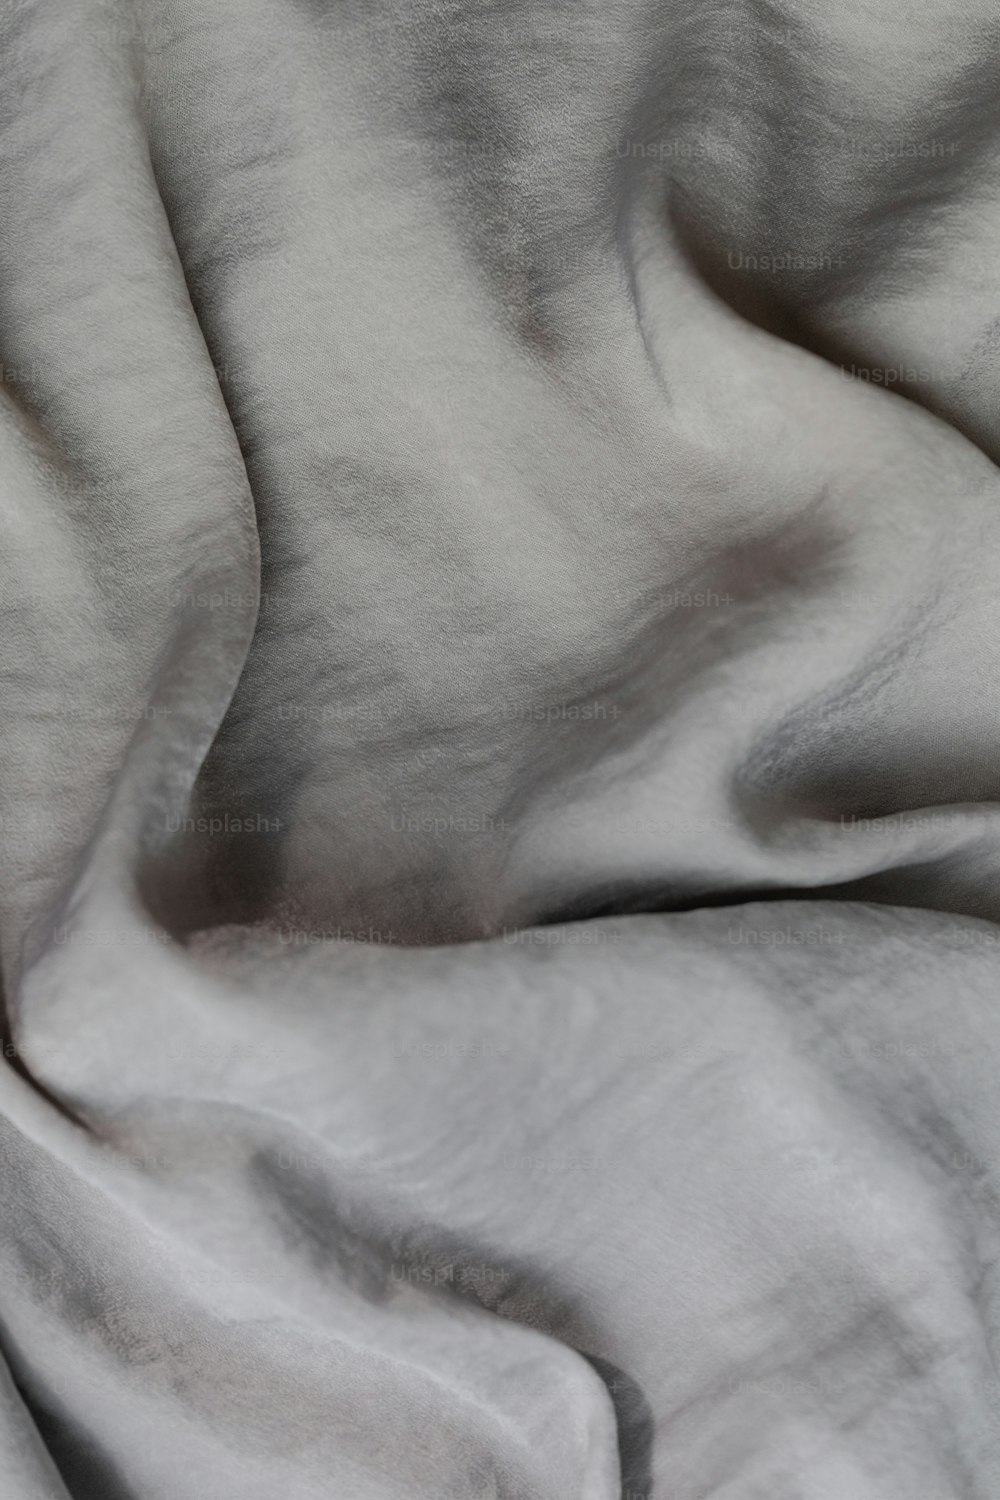 a close up view of a white blanket